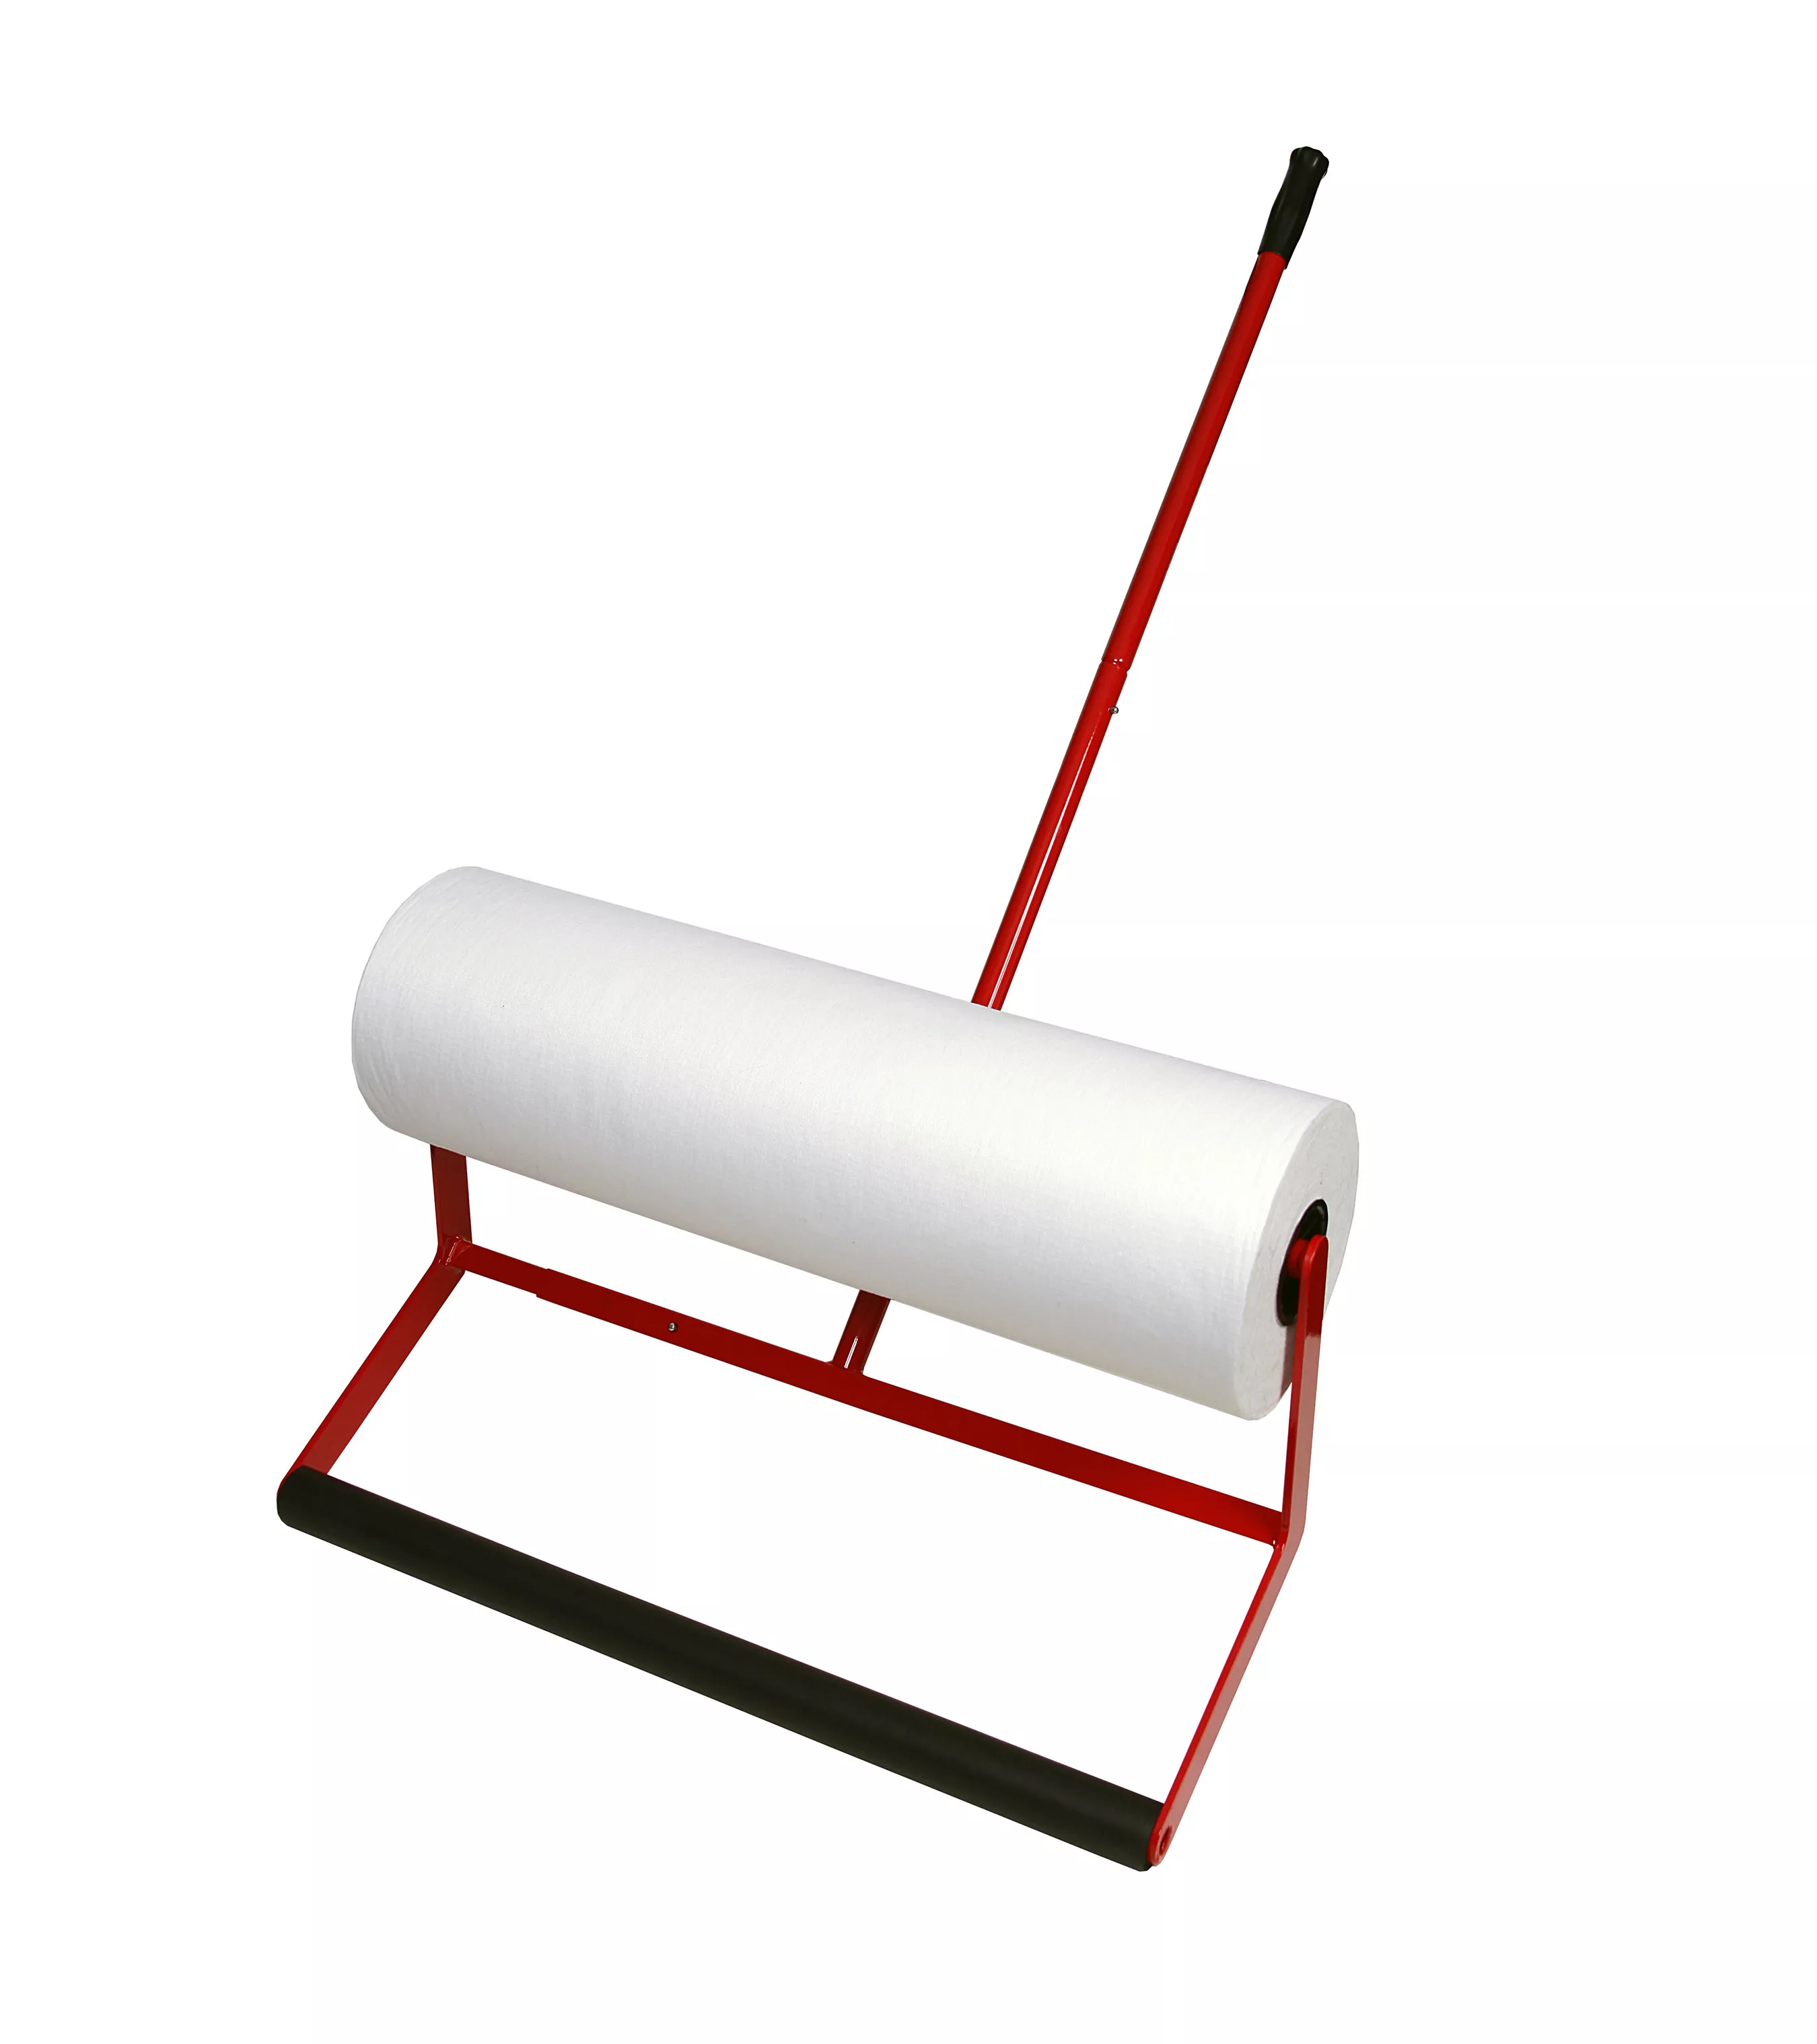 SKU 7100226305 | 3M™ Surface Protection Material Floor Applicator 36865